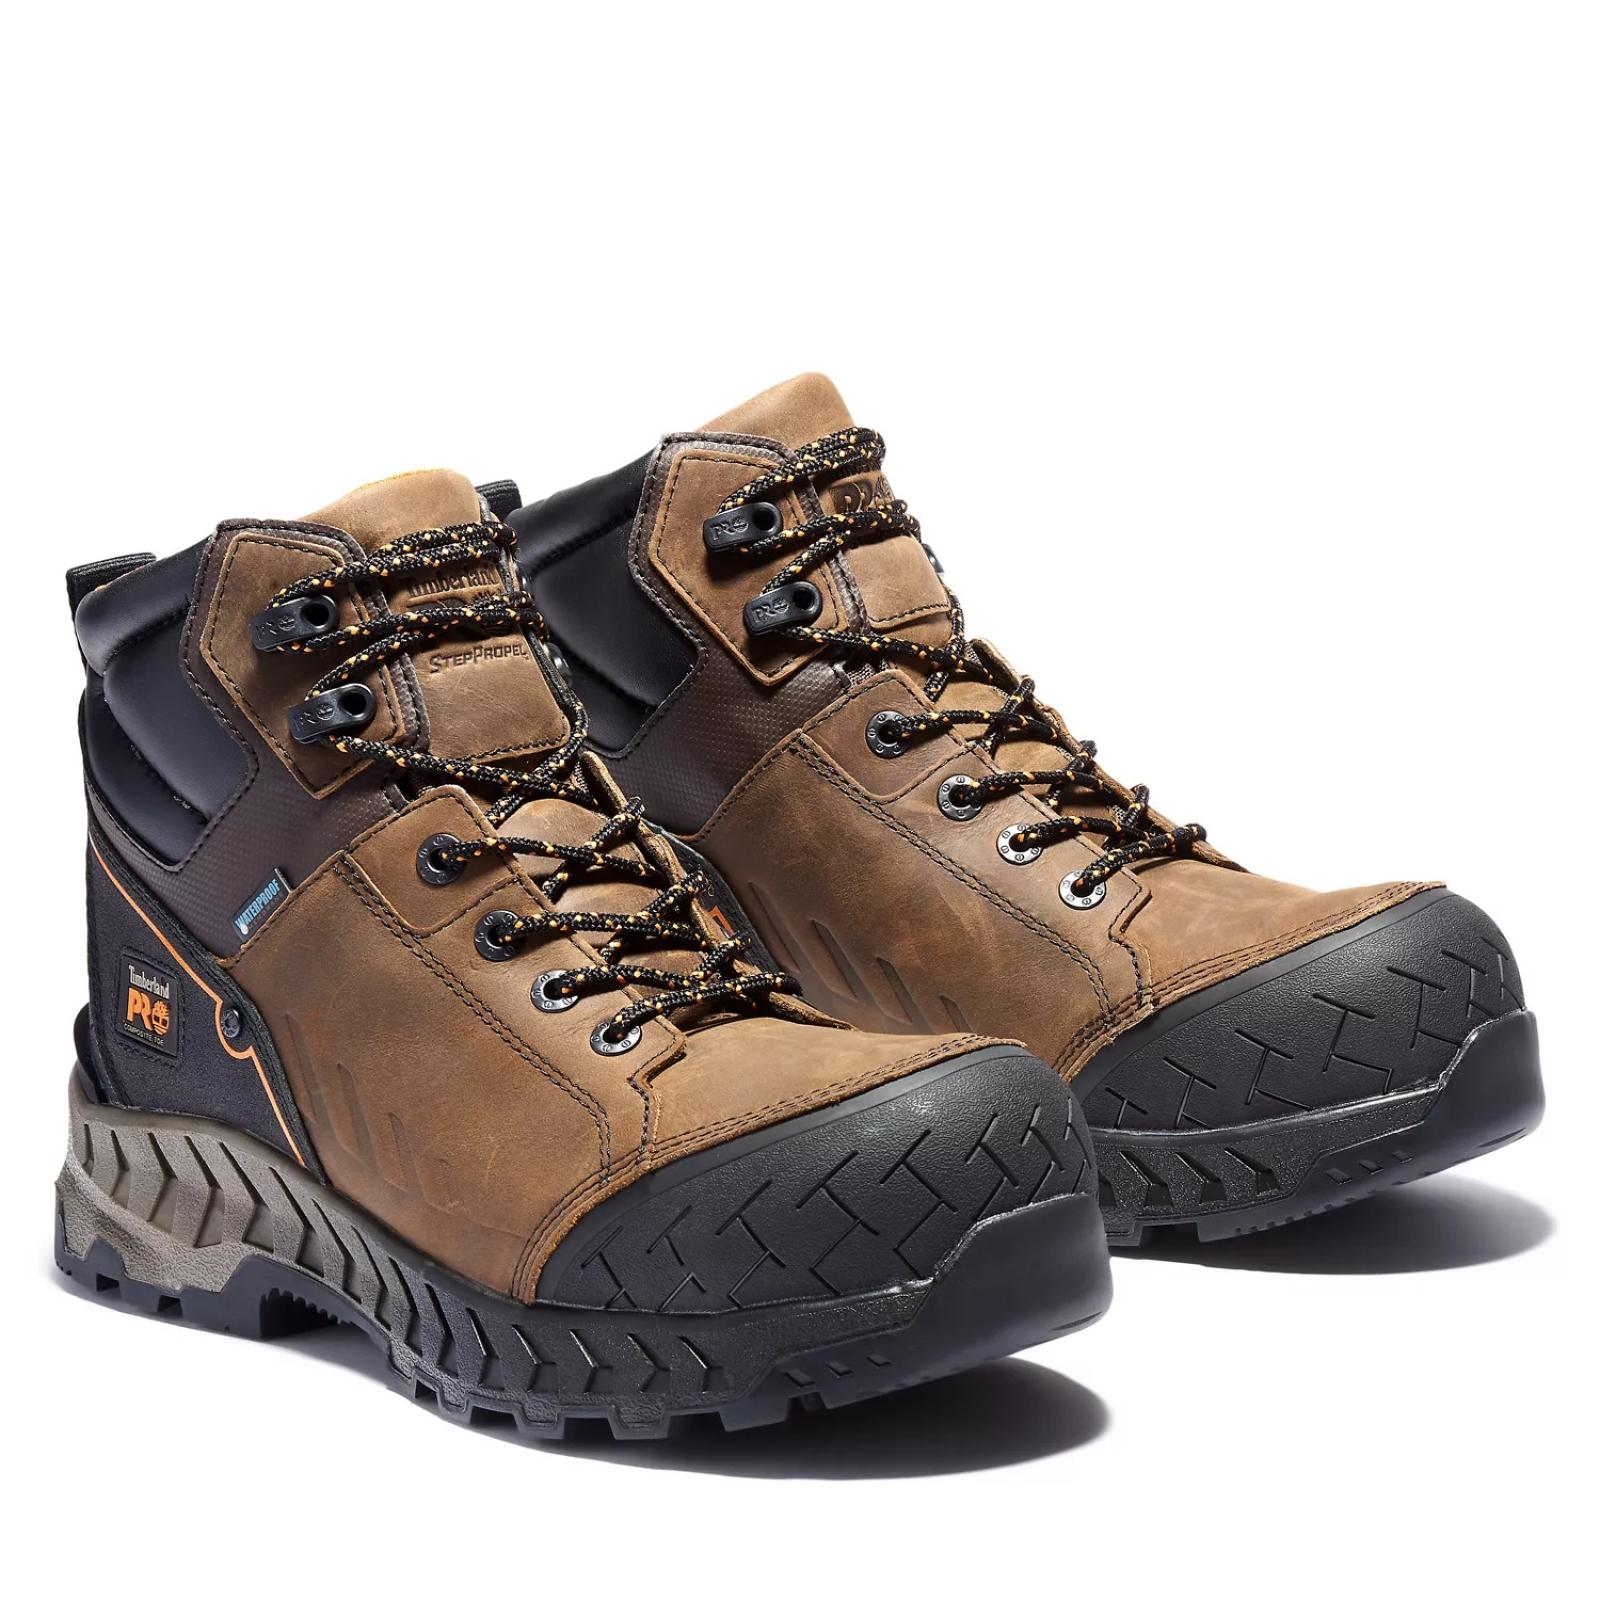 Timberland PRO Men's Summit 6" Composite Toe Work Boots